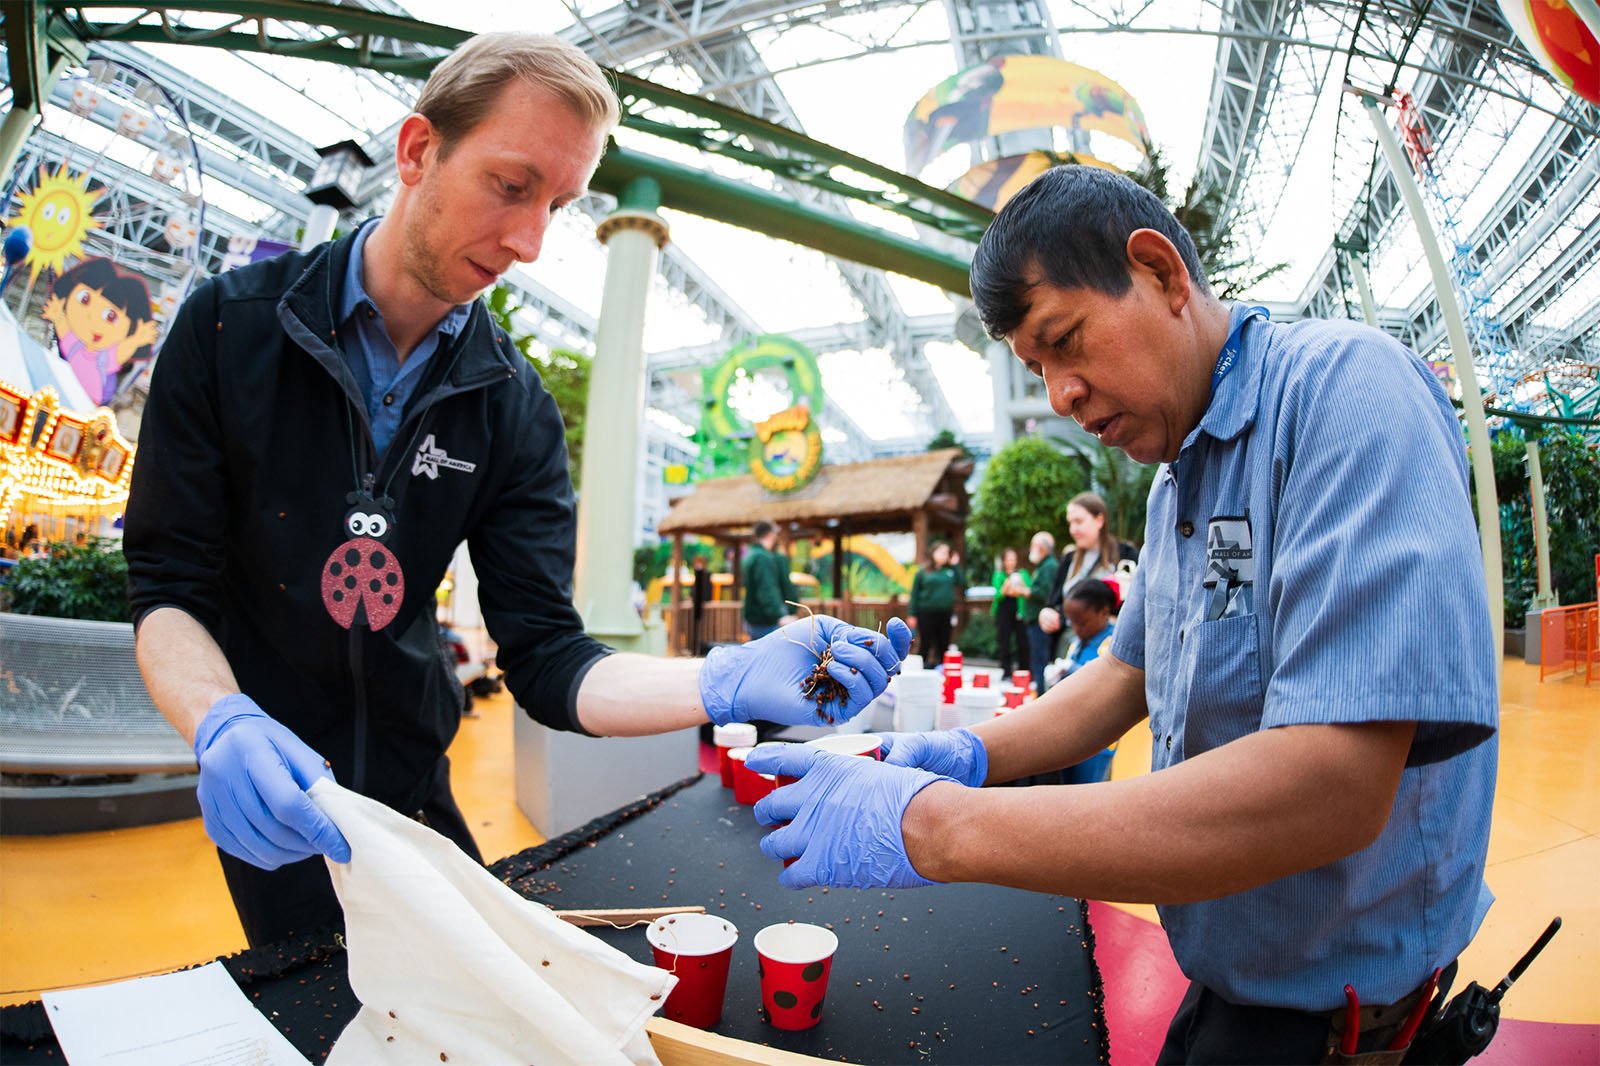 Two men wearing gloves work at a table, handling small objects and bags amidst a colorful amusement park setting, with garden-like decorations and overhead structures.